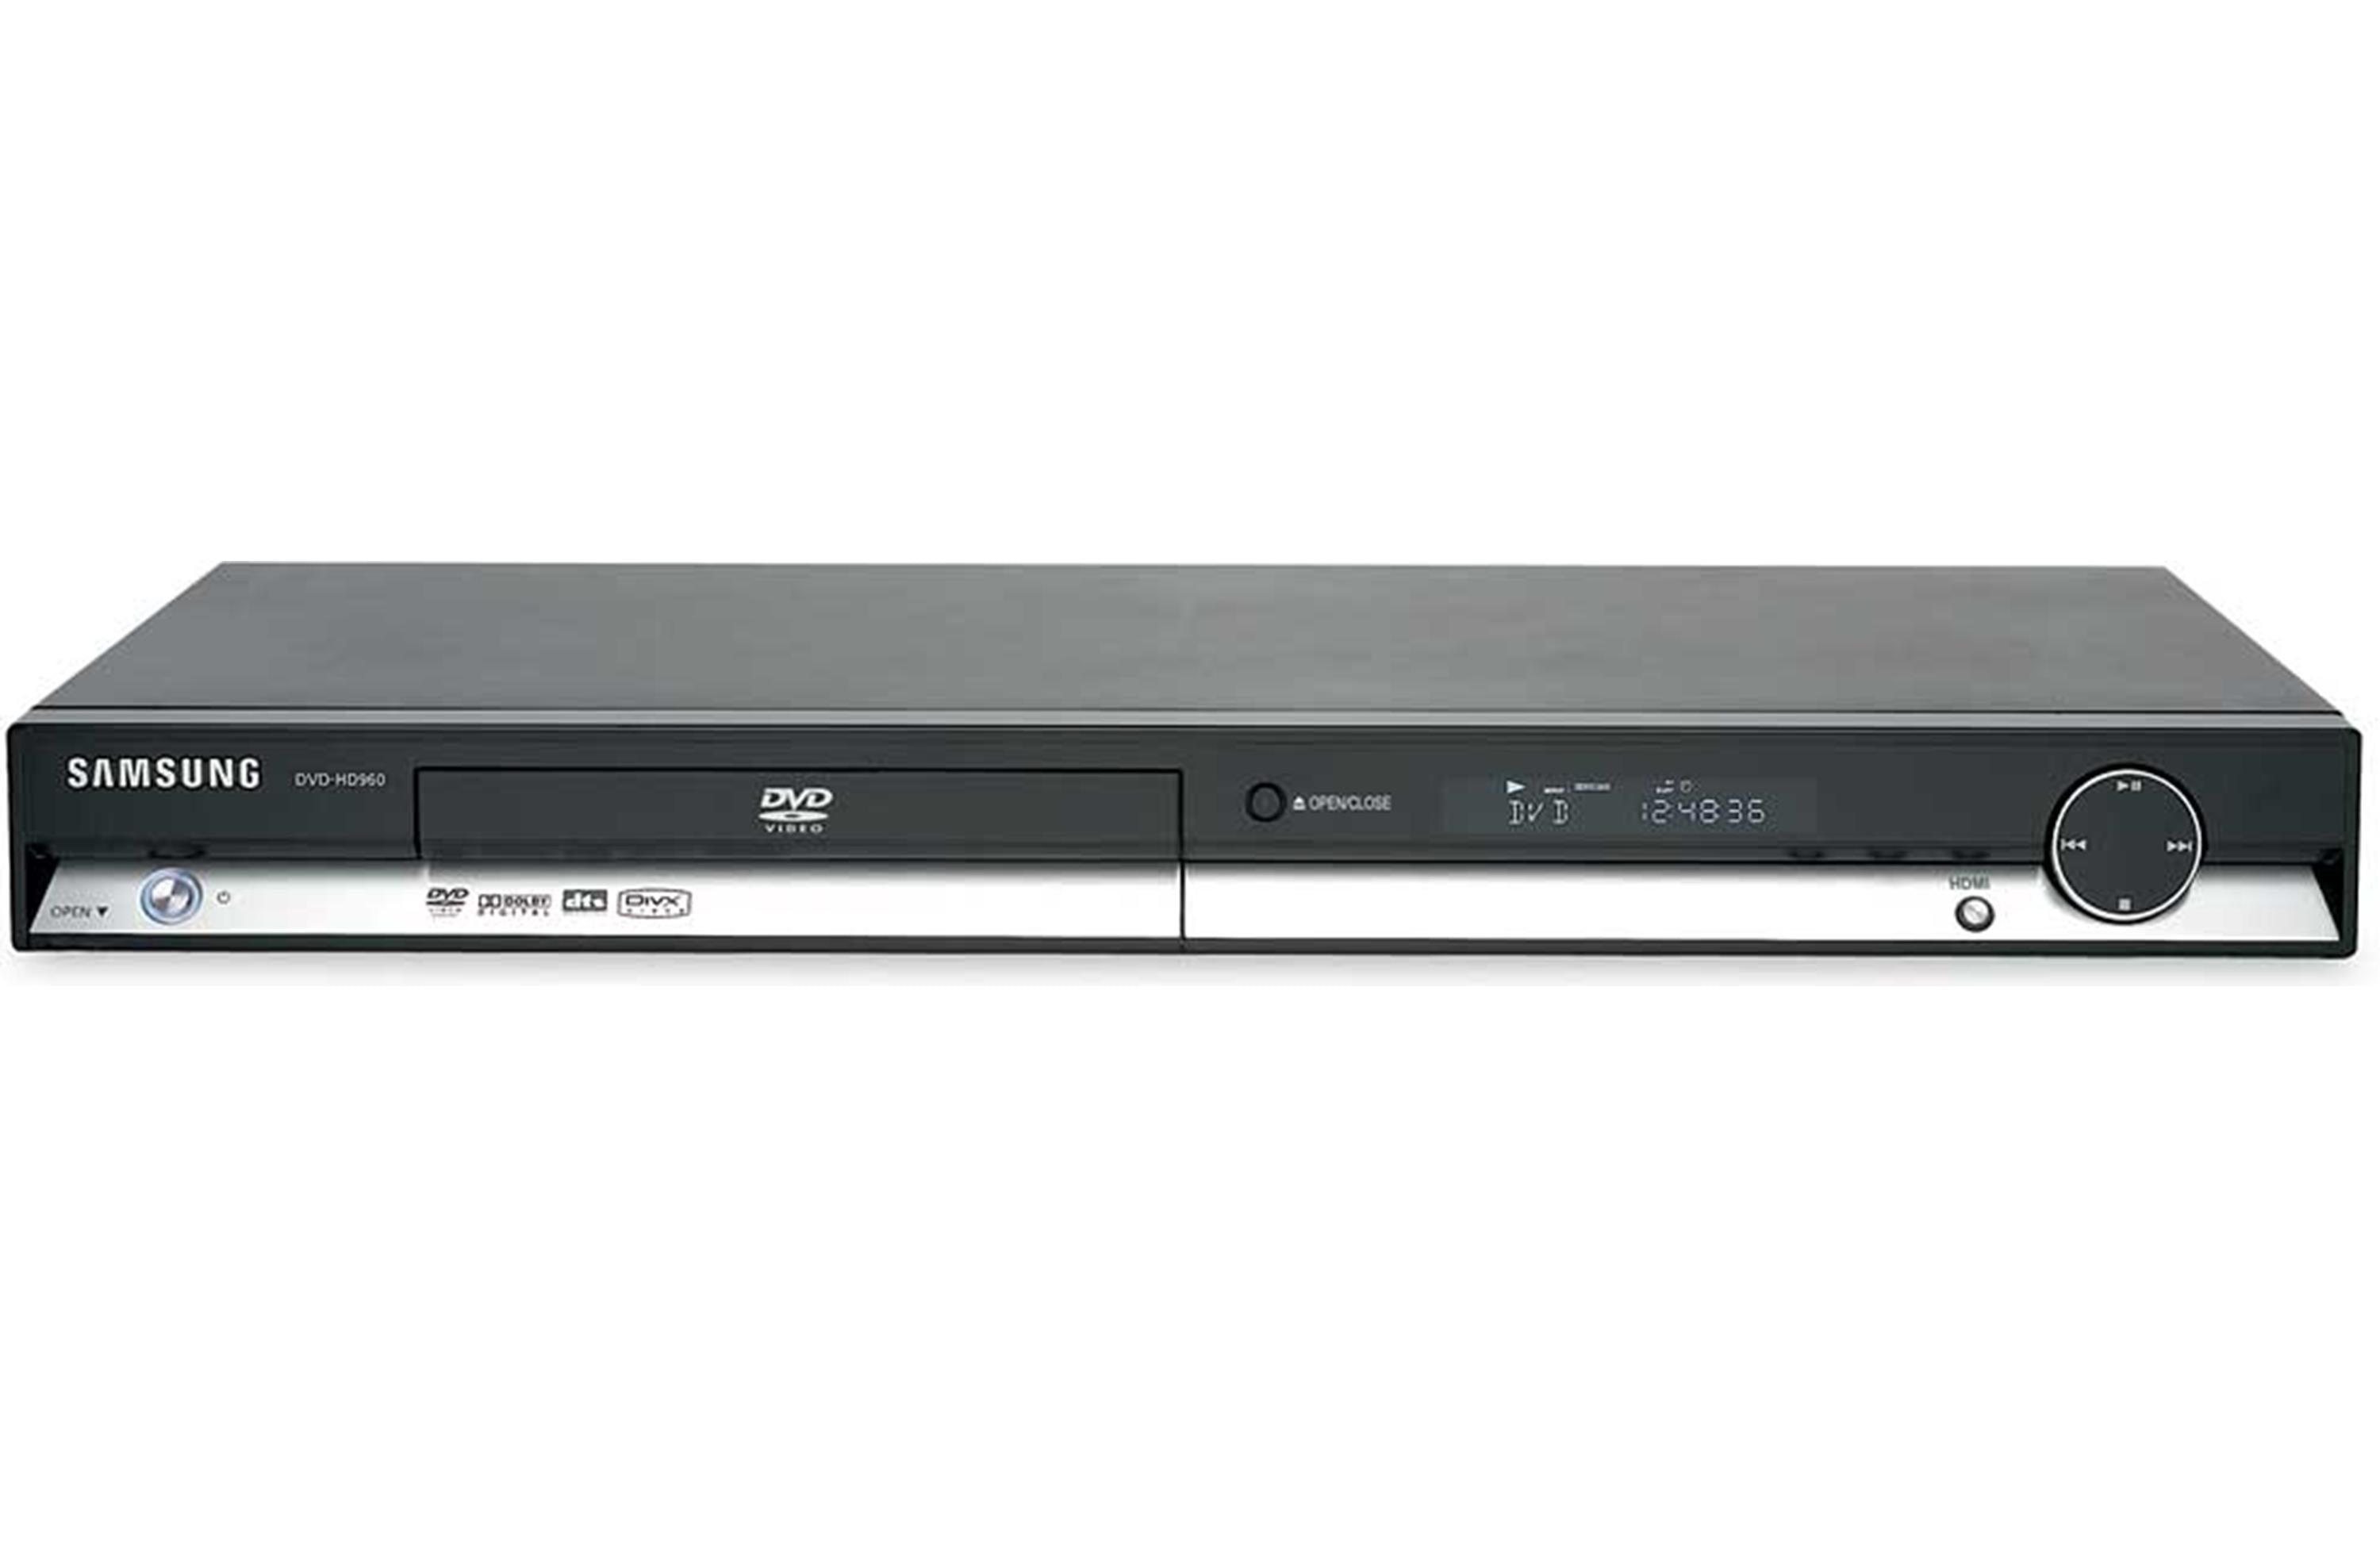 Samsung DVDHD960 DVD/cd Player With Digital Video Output